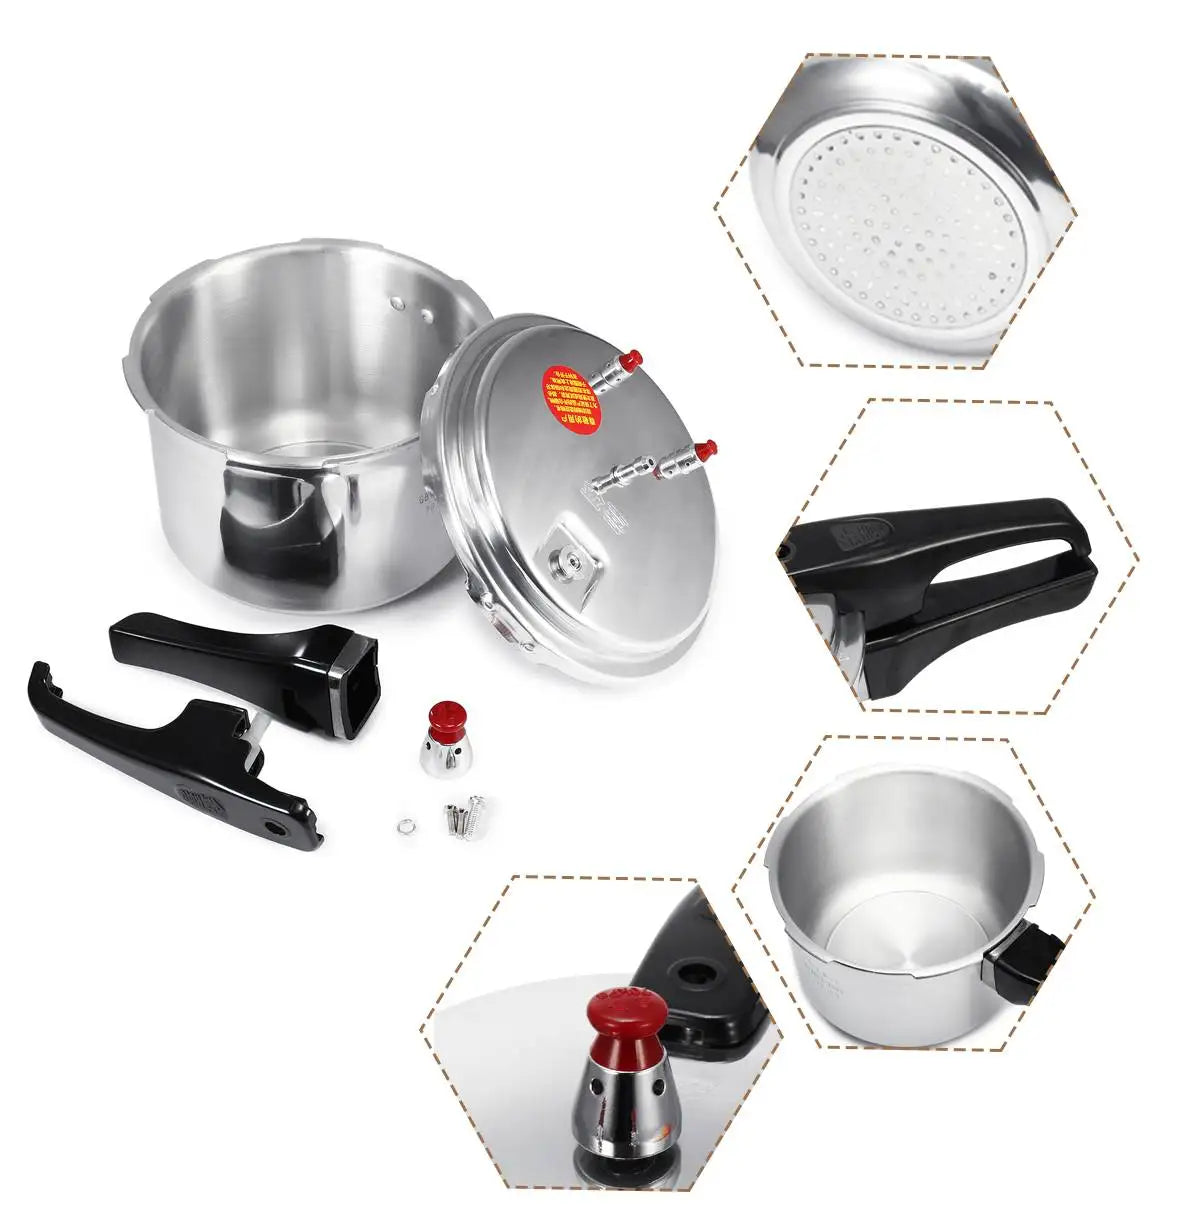 18cm Kitchen Pressure Cooker
20cm Electric Stove 
22cm Gas Stove 
Energy-saving Cooking Utensils 
Aluminum Alloy Safety Cookware